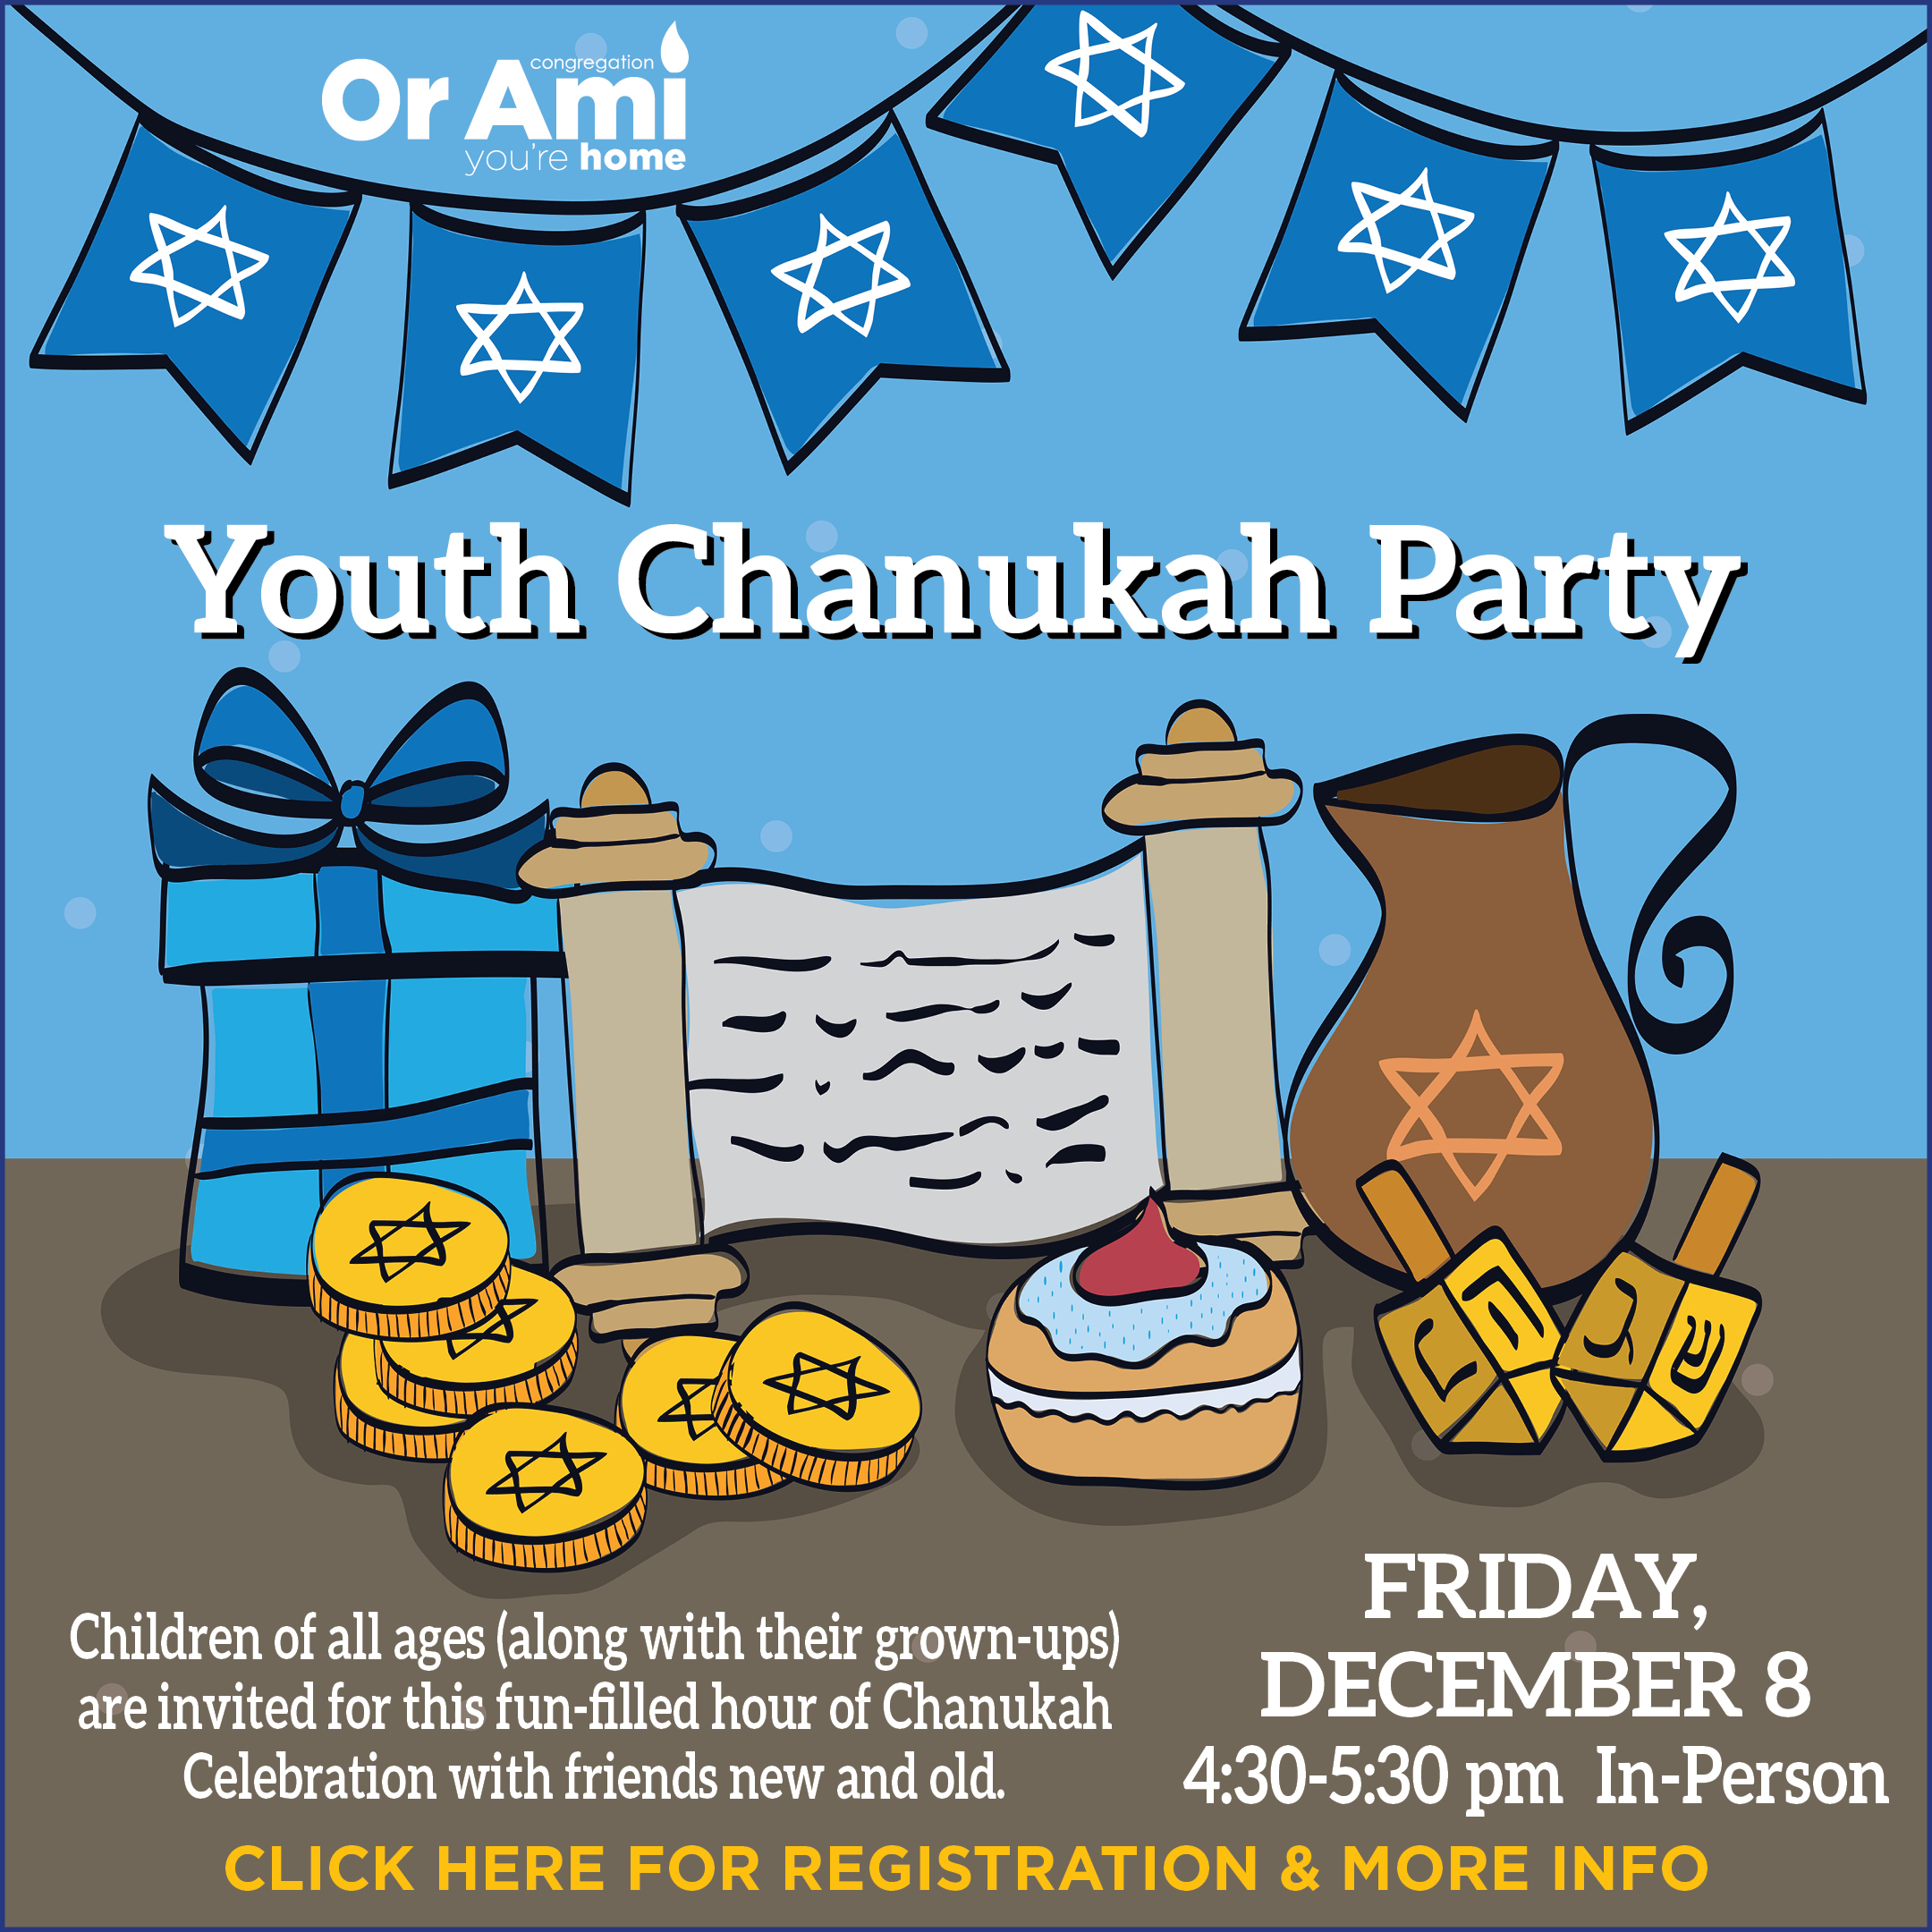 *Or Ami Youth Chanukah Party Dec 8 CLICK